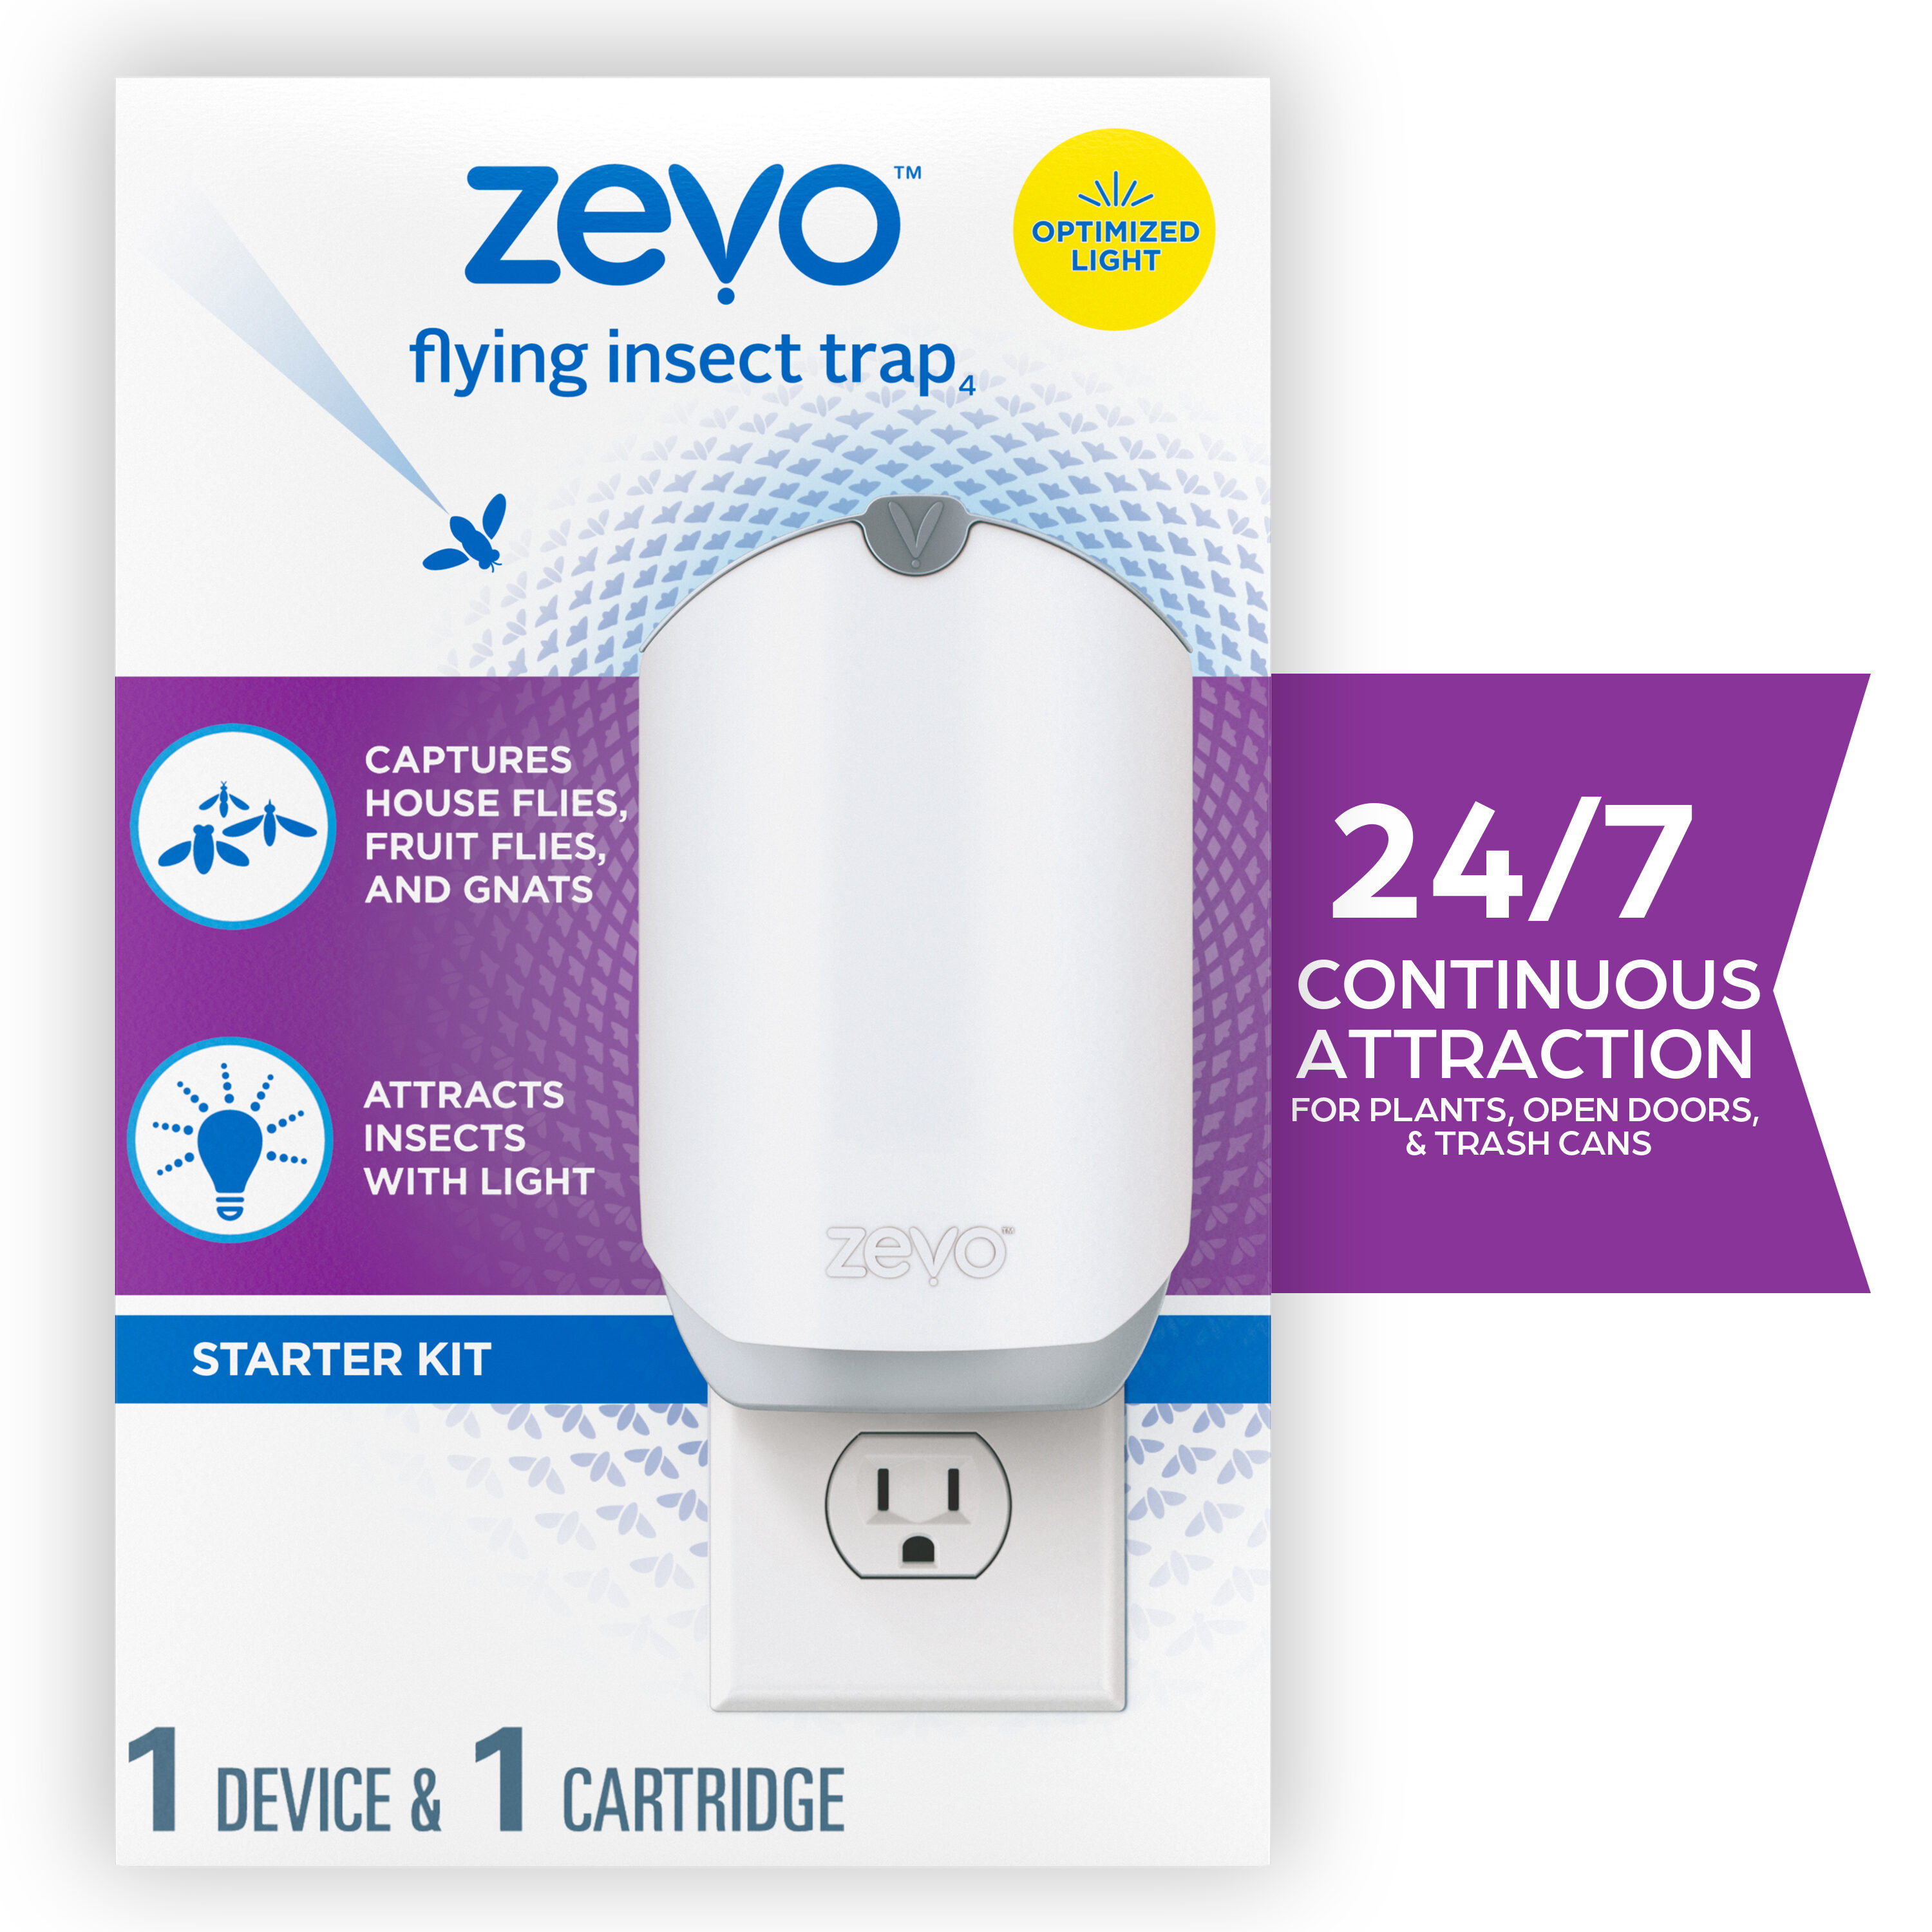 Zevo Flying Insect Trap (1 Plug-In Base + 1 Cartridge) Indoor